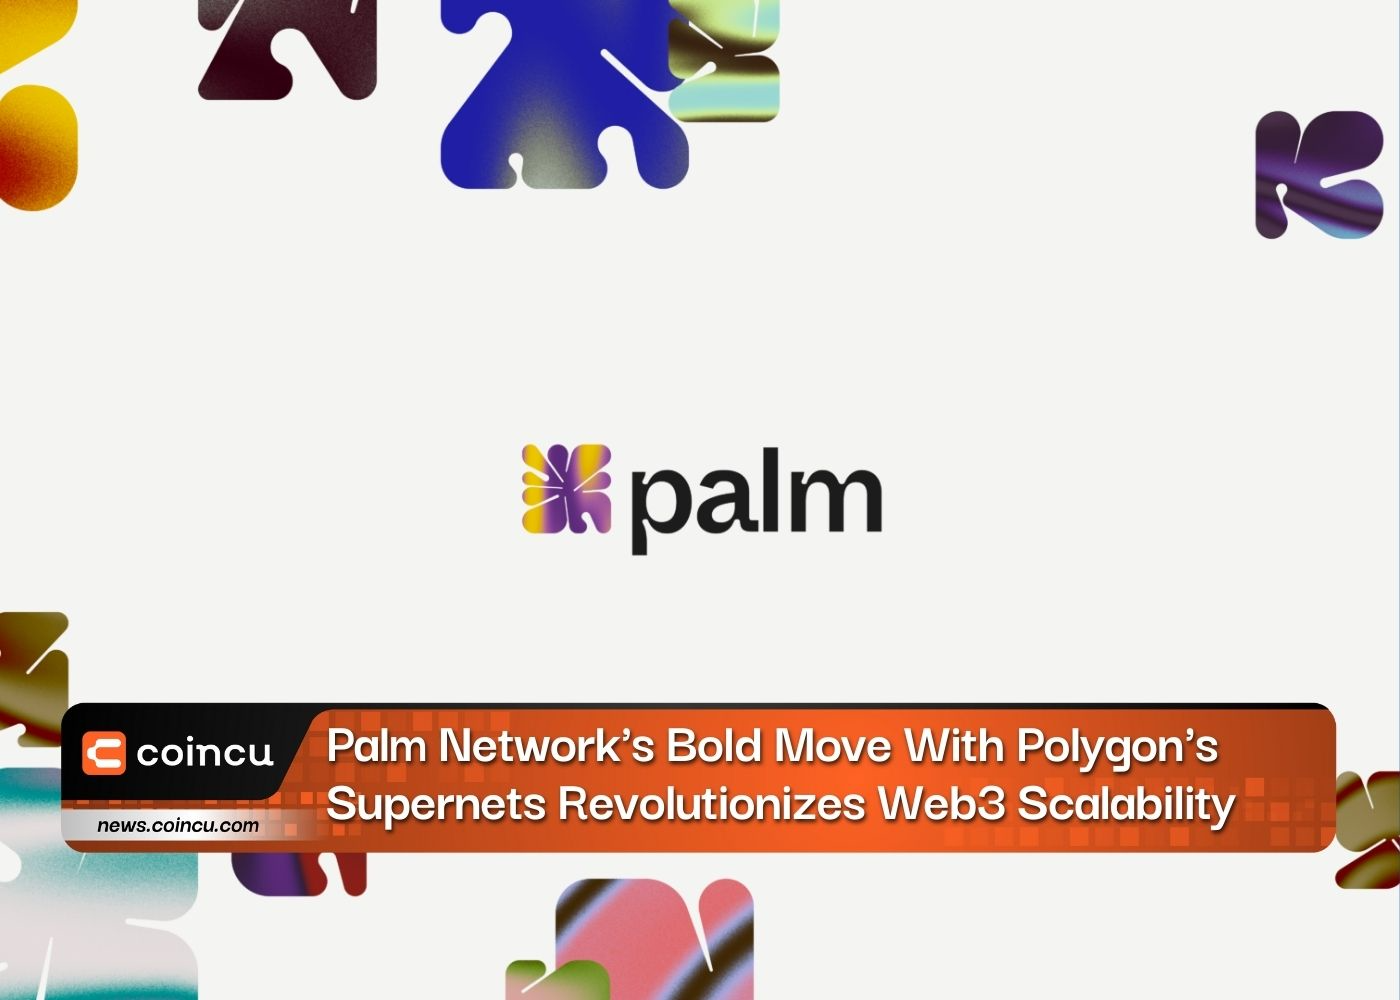 Palm Network’s Bold Move With Polygon’s Supernets Revolutionizes Web3 Scalability